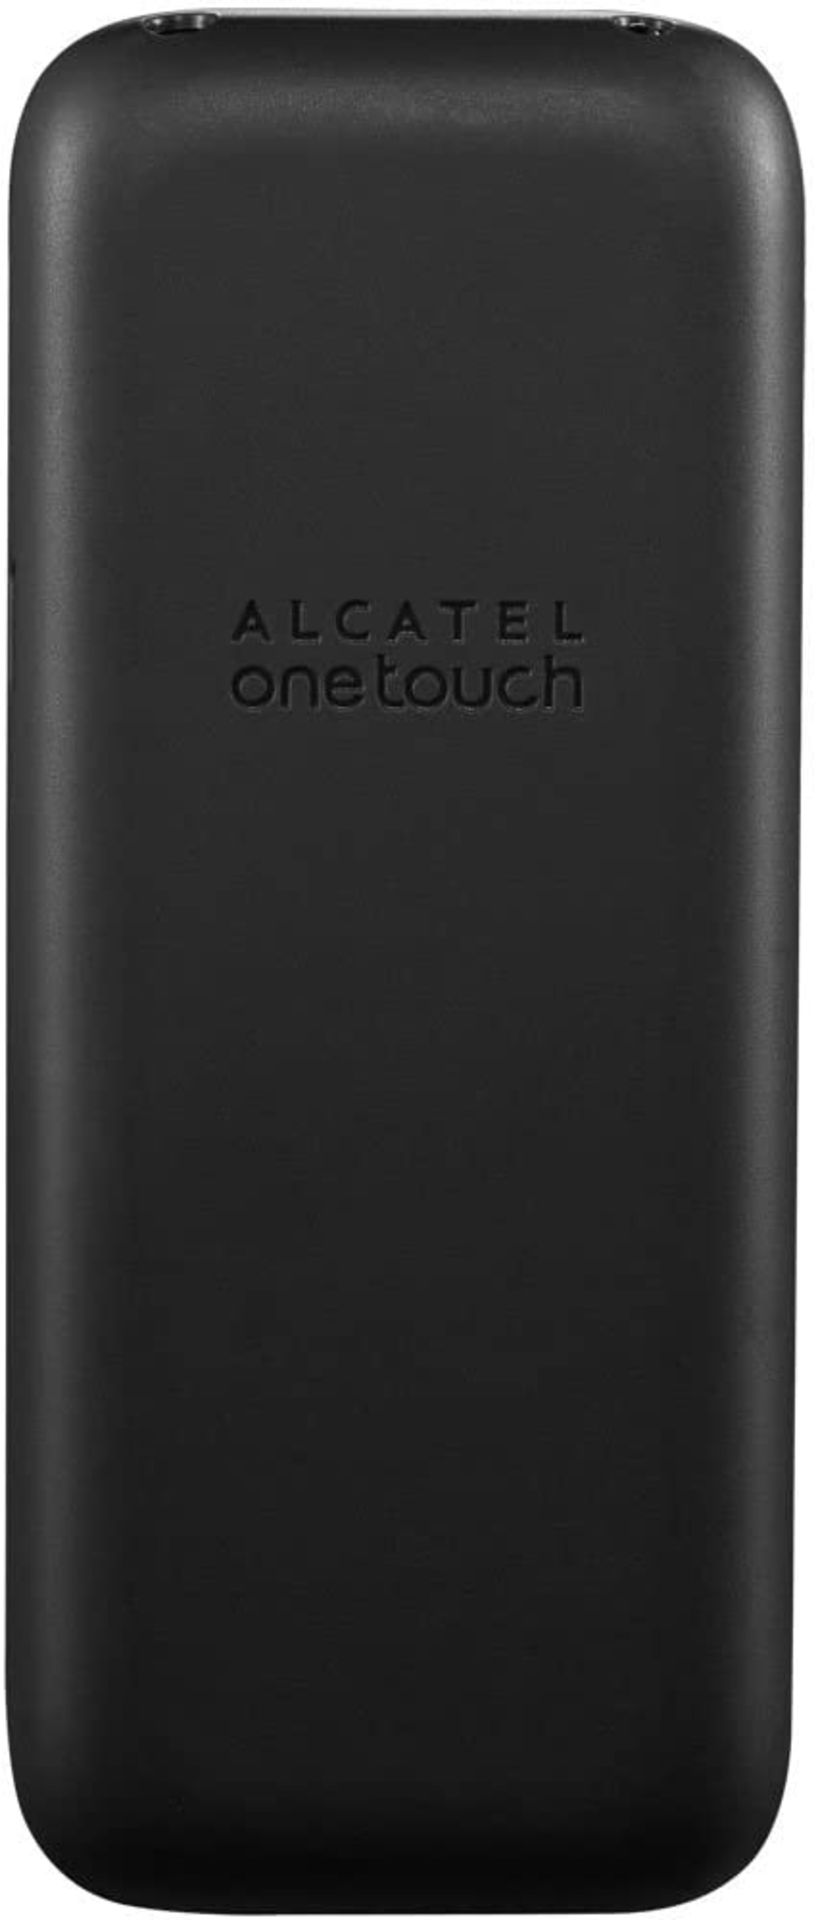 (M44) Alcatel OneTouch 10.16G UK SIM-Free Mobile Phone - Black Display size: 1.8" Memory: 4MB ... - Image 2 of 2